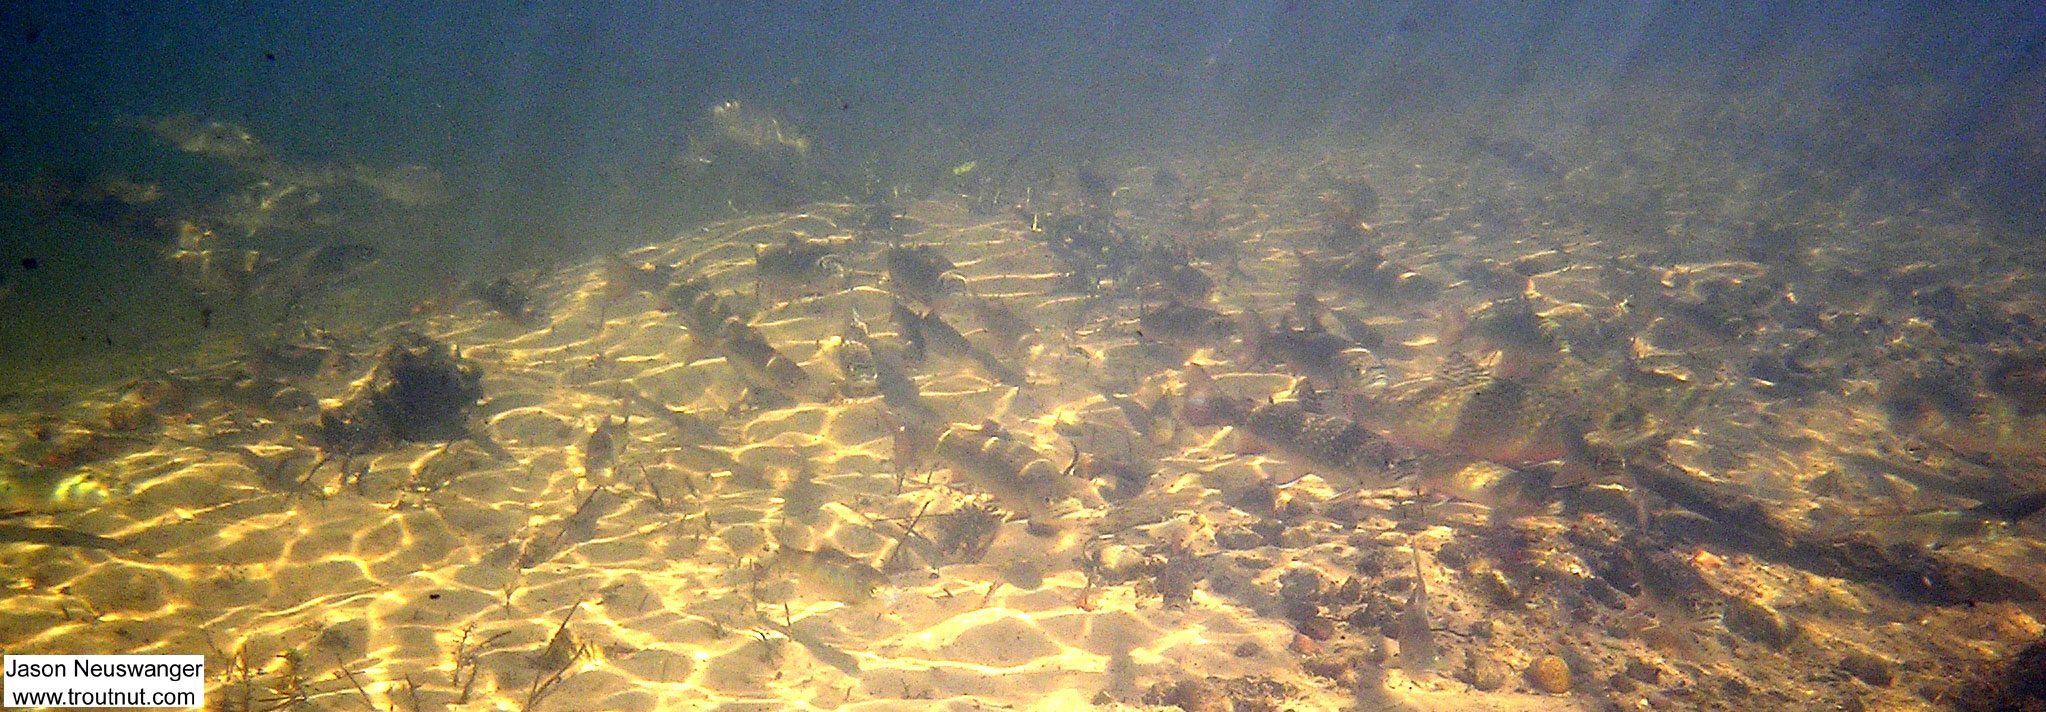 This is my favorite picture of this school of brookies. Notice there are a few other fish mixed in, minnow family mostly. Near the bottom right there's a really big brookie. These trout were densely schooled up near a major spring source during the dead of winter. From the Mystery Creek # 19 in Wisconsin.